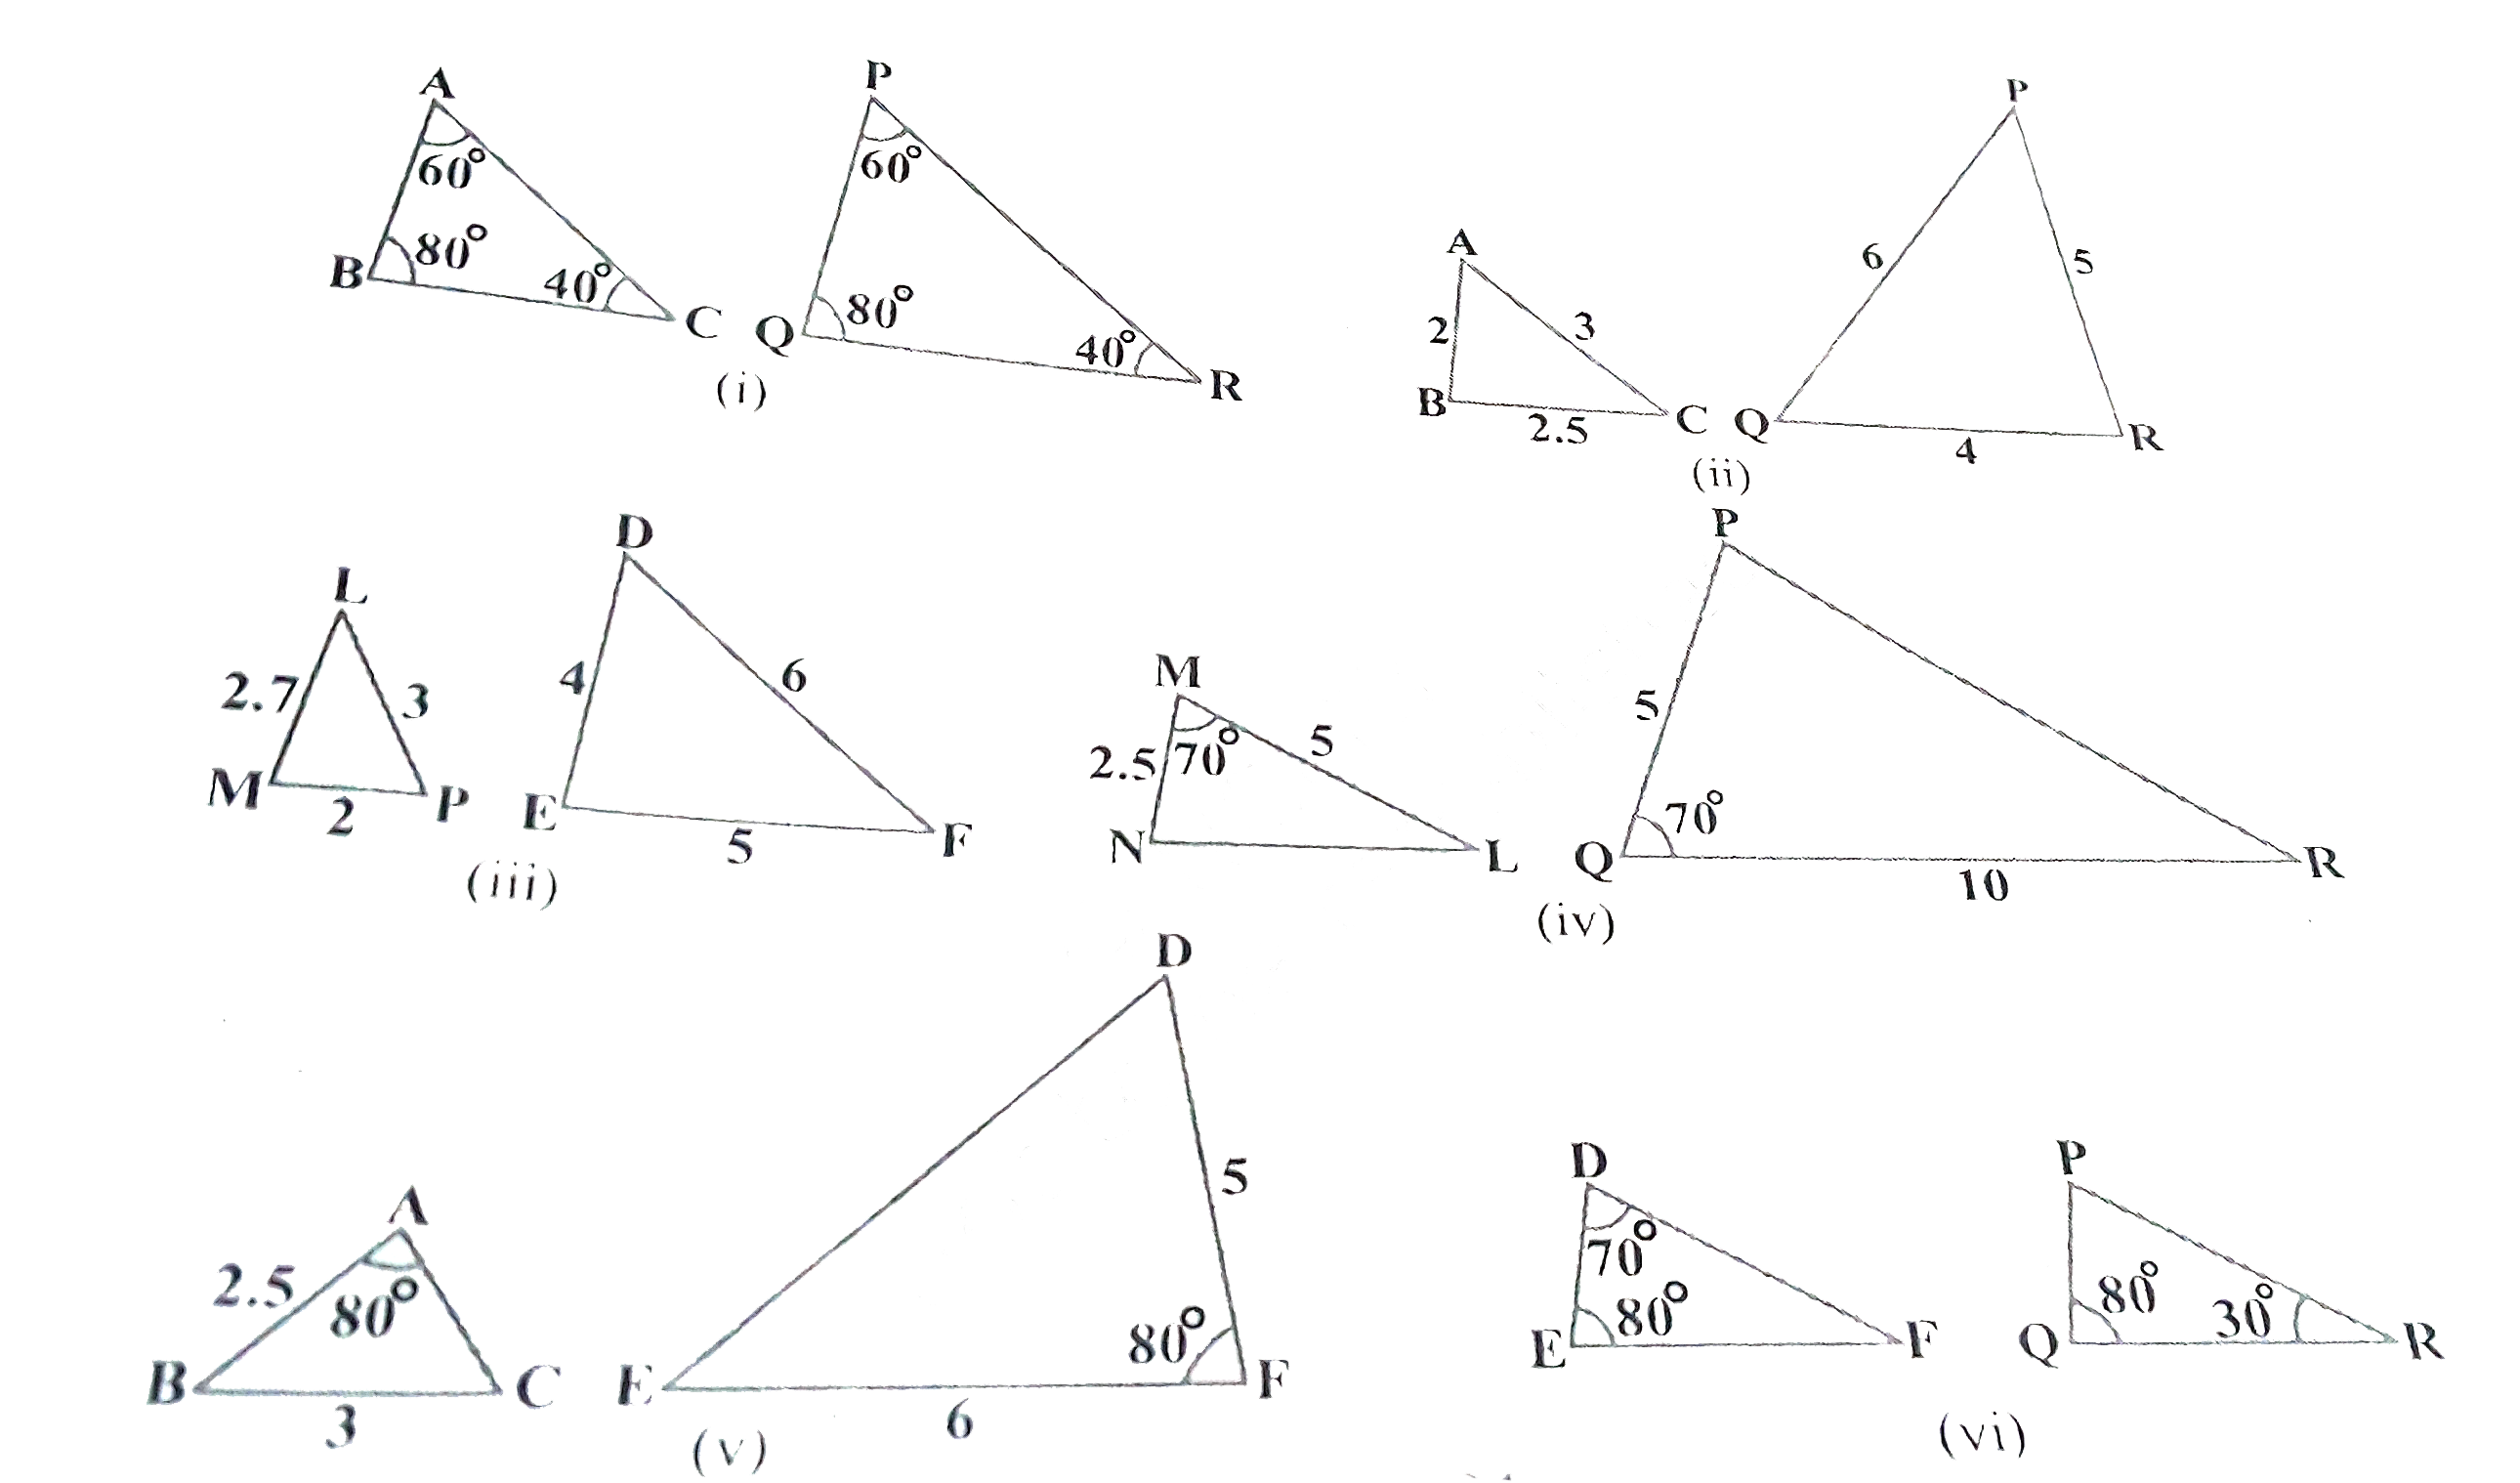 State  which pairs of triangles in Figure are similar. Write the similarity  criterion used by you for answering the question and also write the pairs of  similar triangles in the symbolic form: